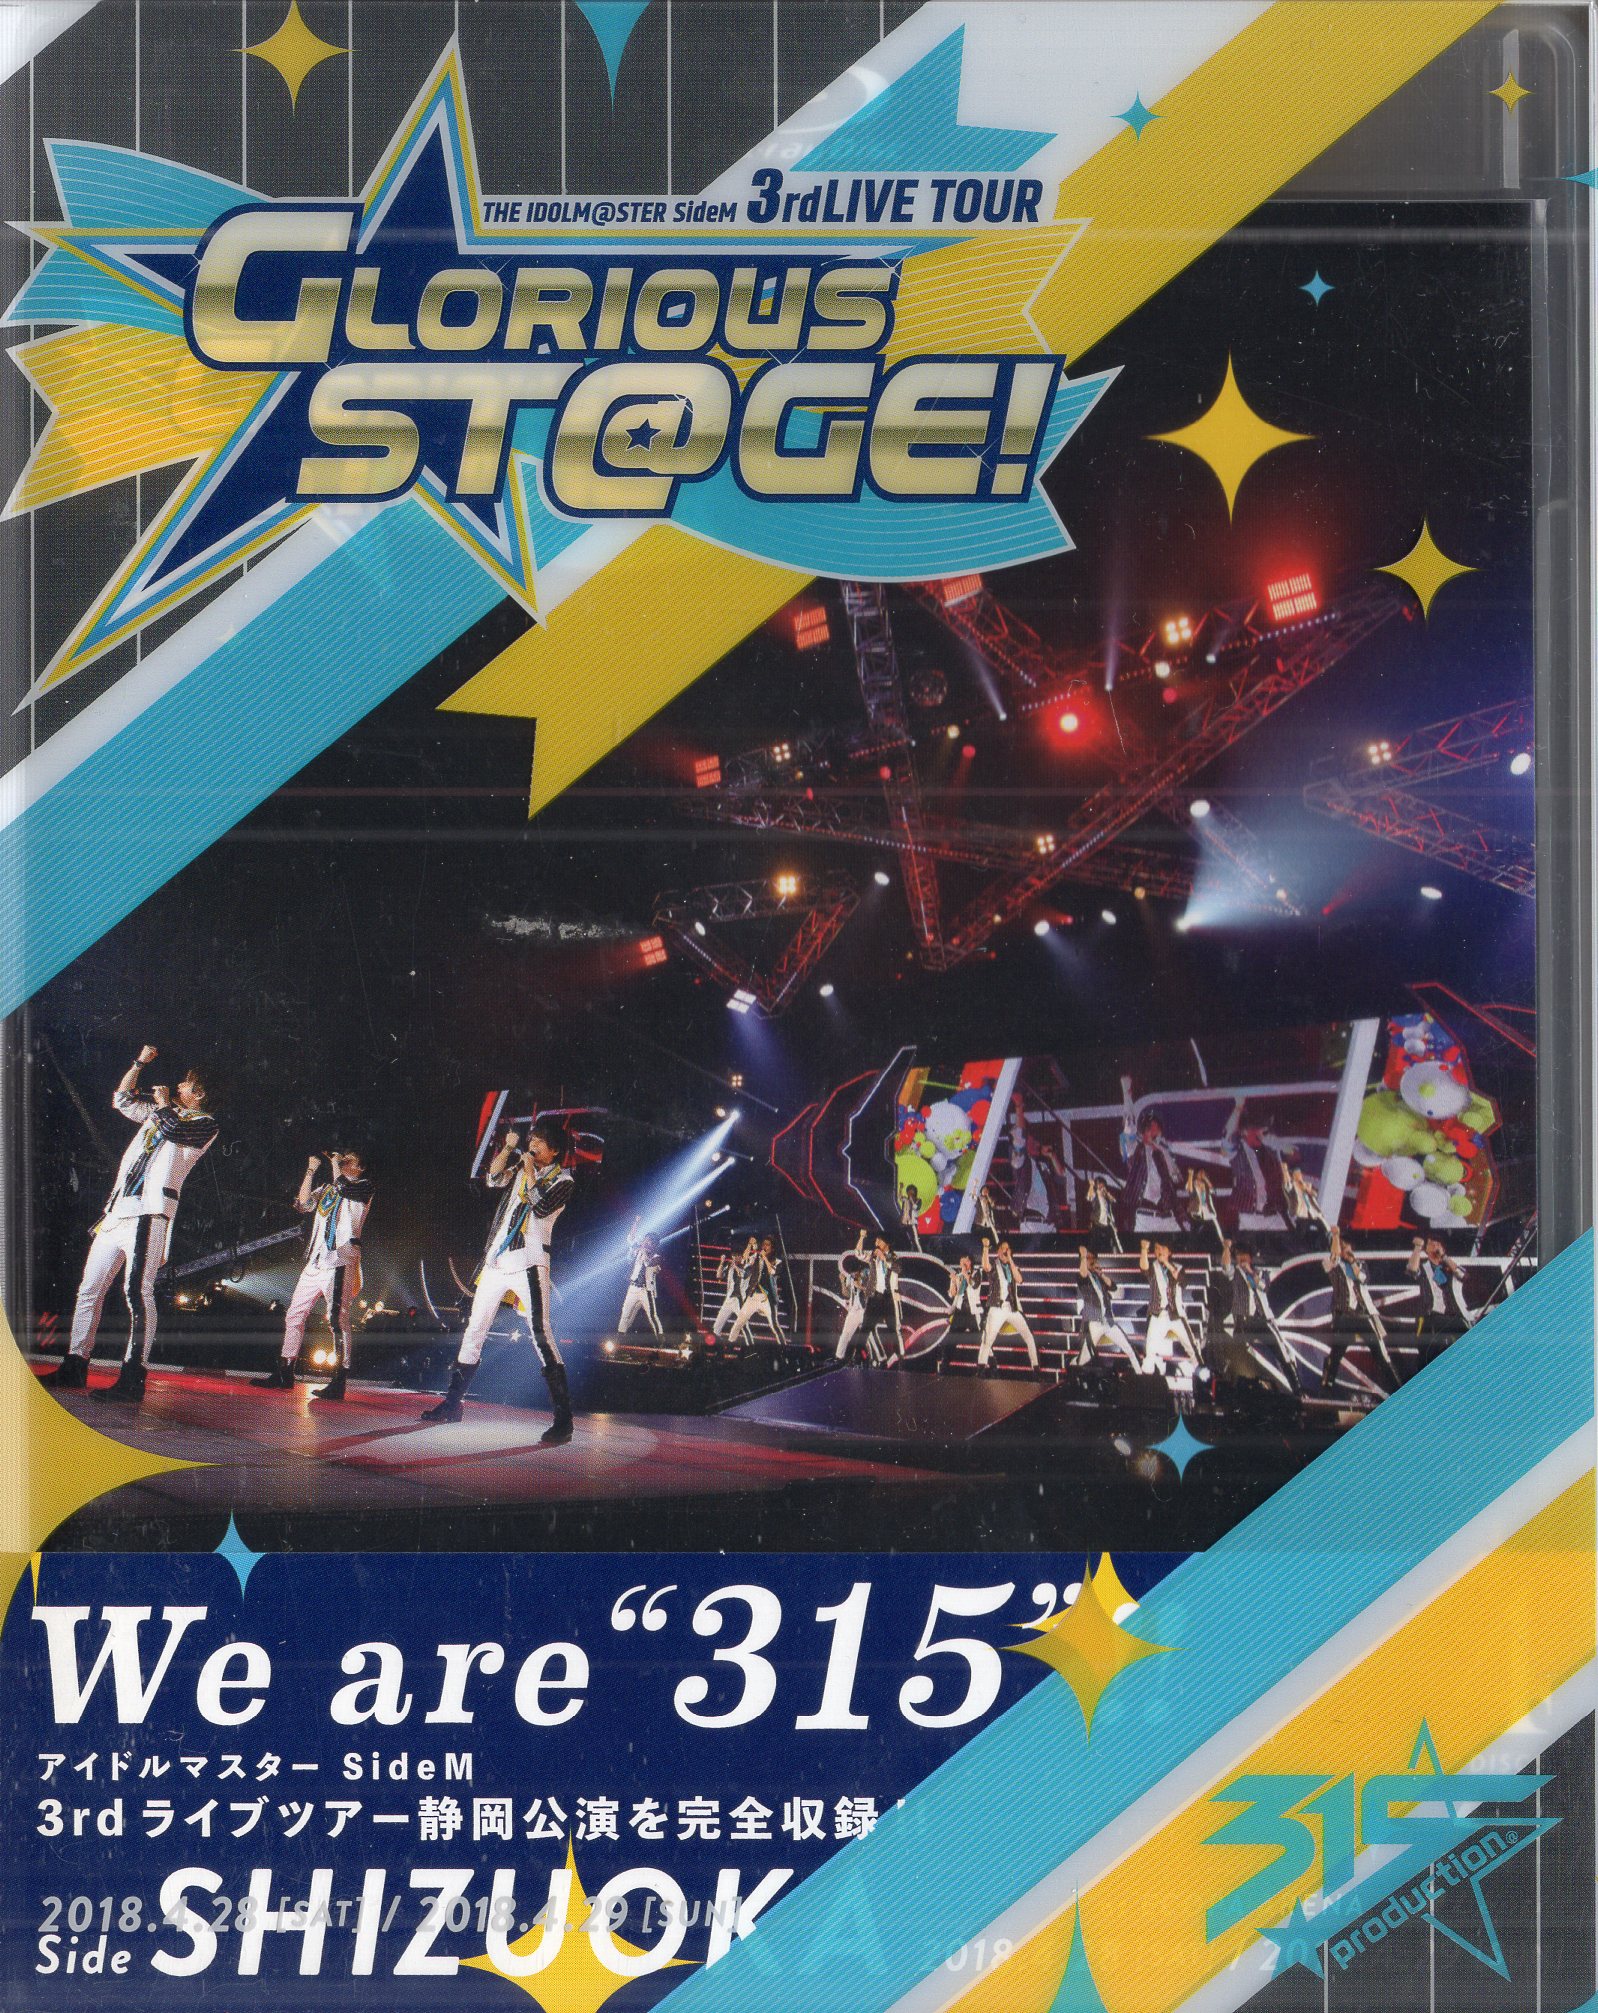 THE IDOLM@STER SideM 3rdLIVE TOUR - アニメ